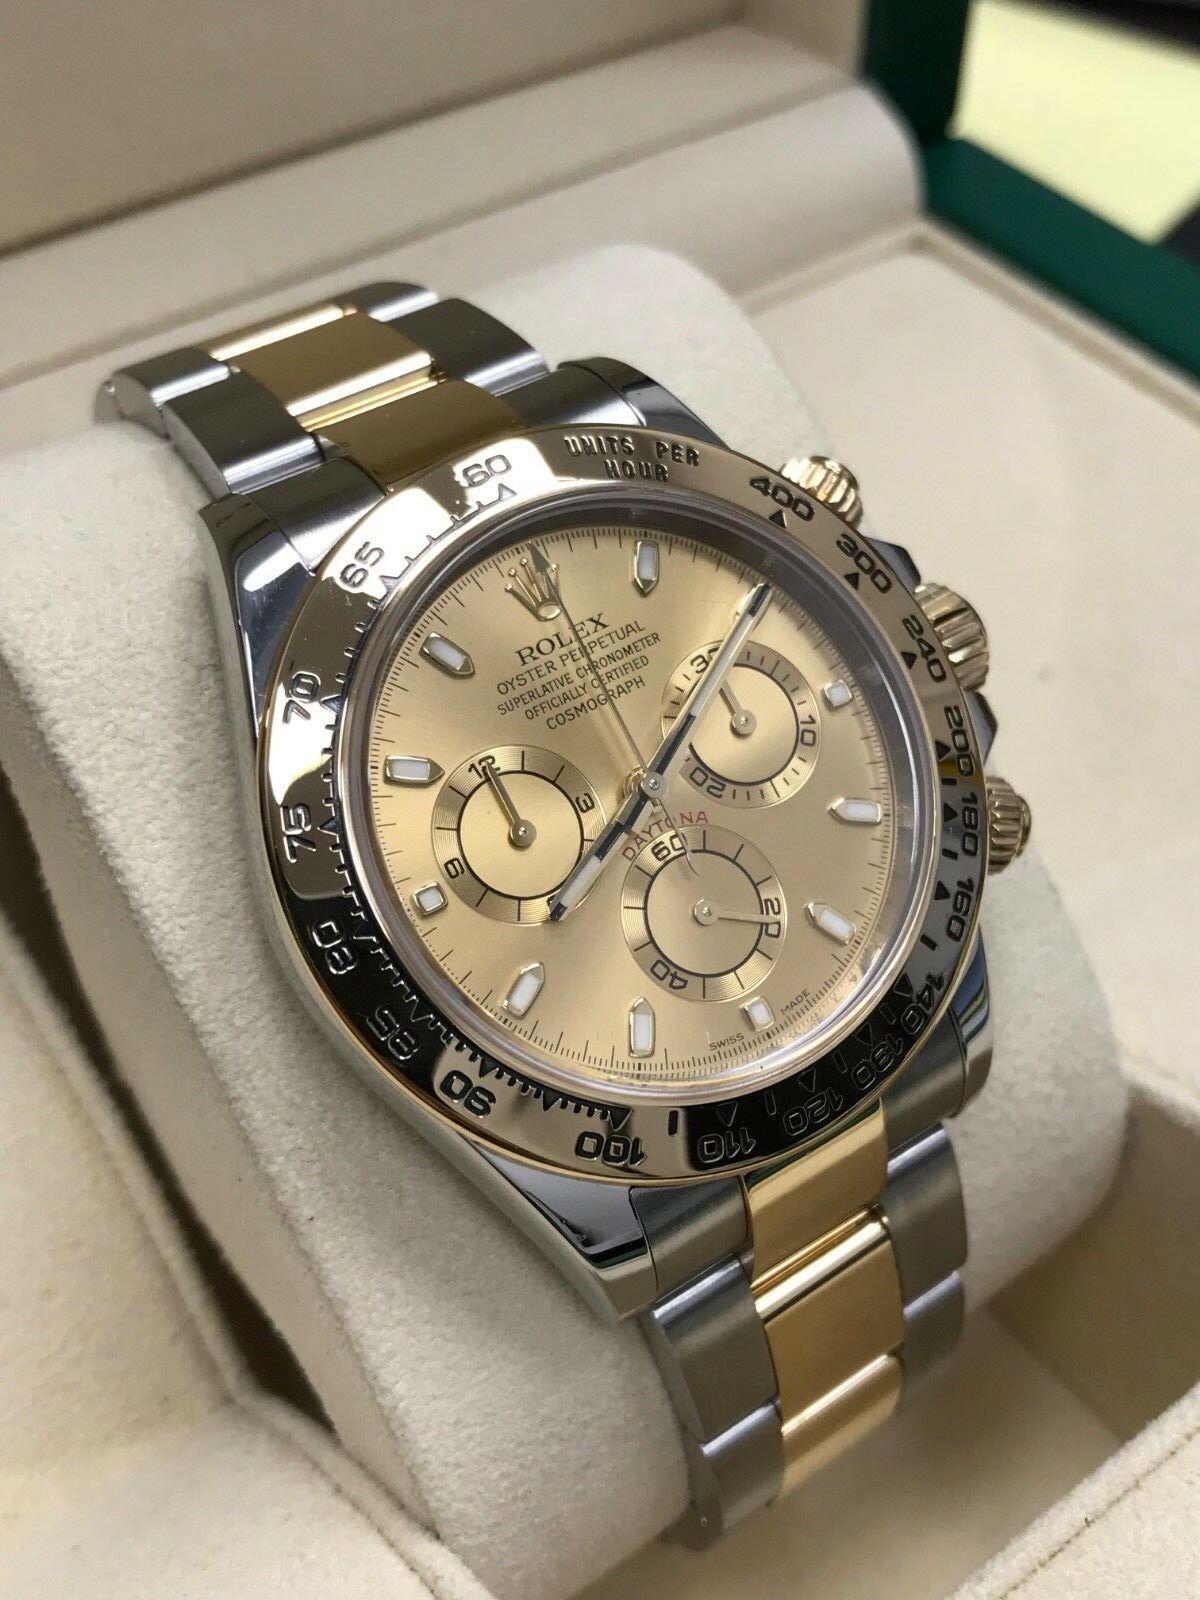 Rolex Daytona 116503 18 Karat Gold and Stainless Steel Champagne Box Papers 2016 2